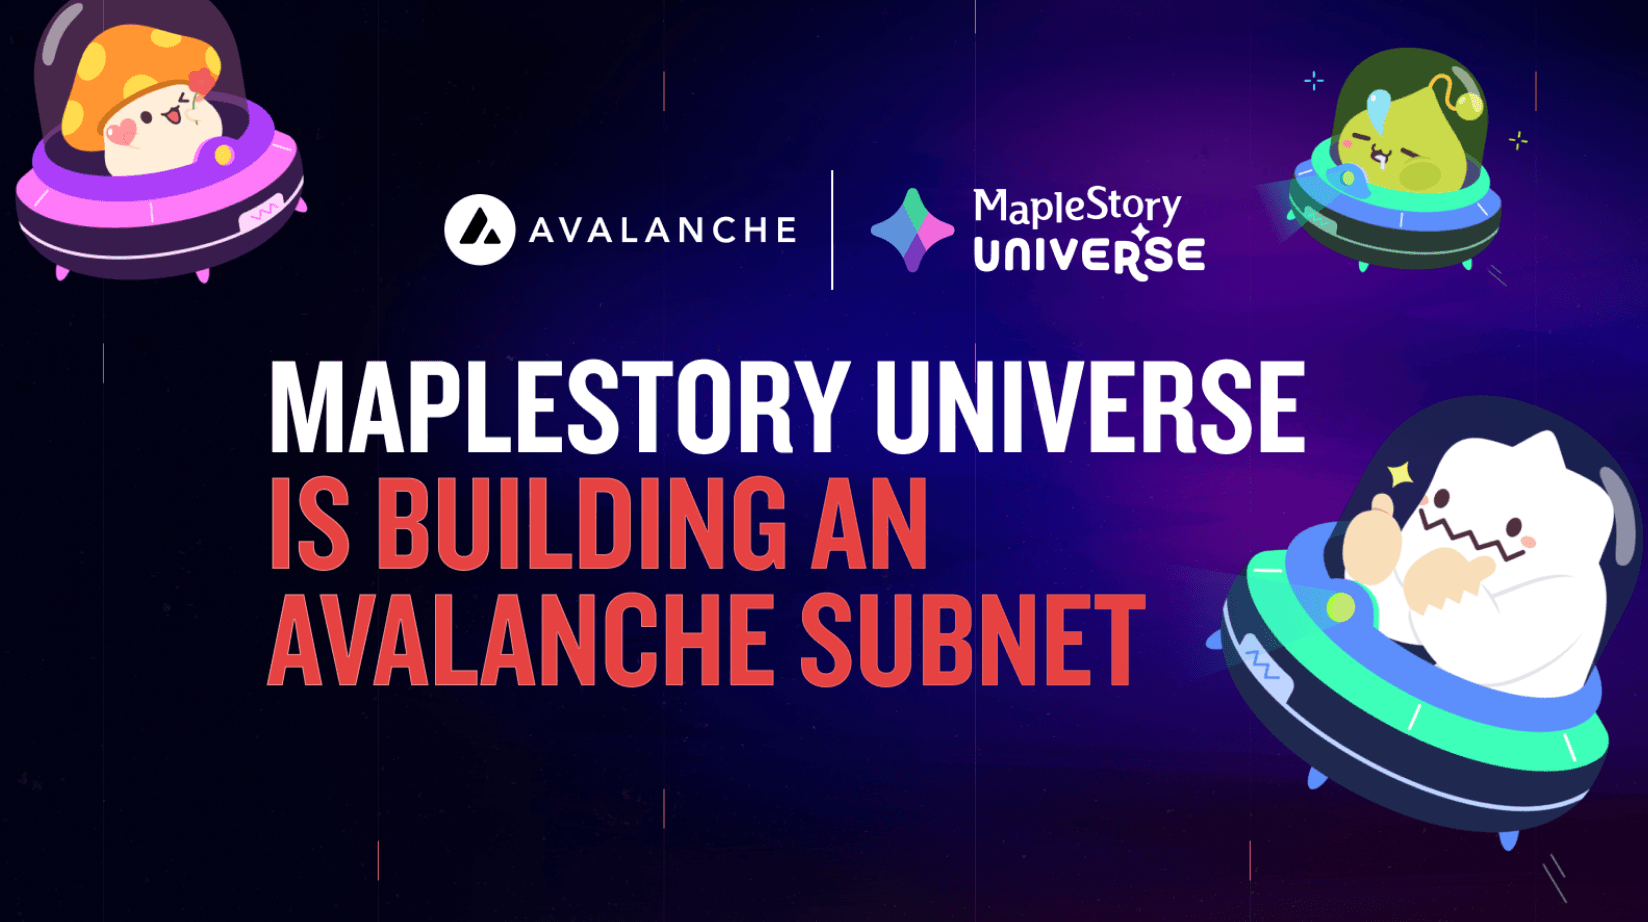 Legendary MMORPG MapleStory Comes to Avalanche